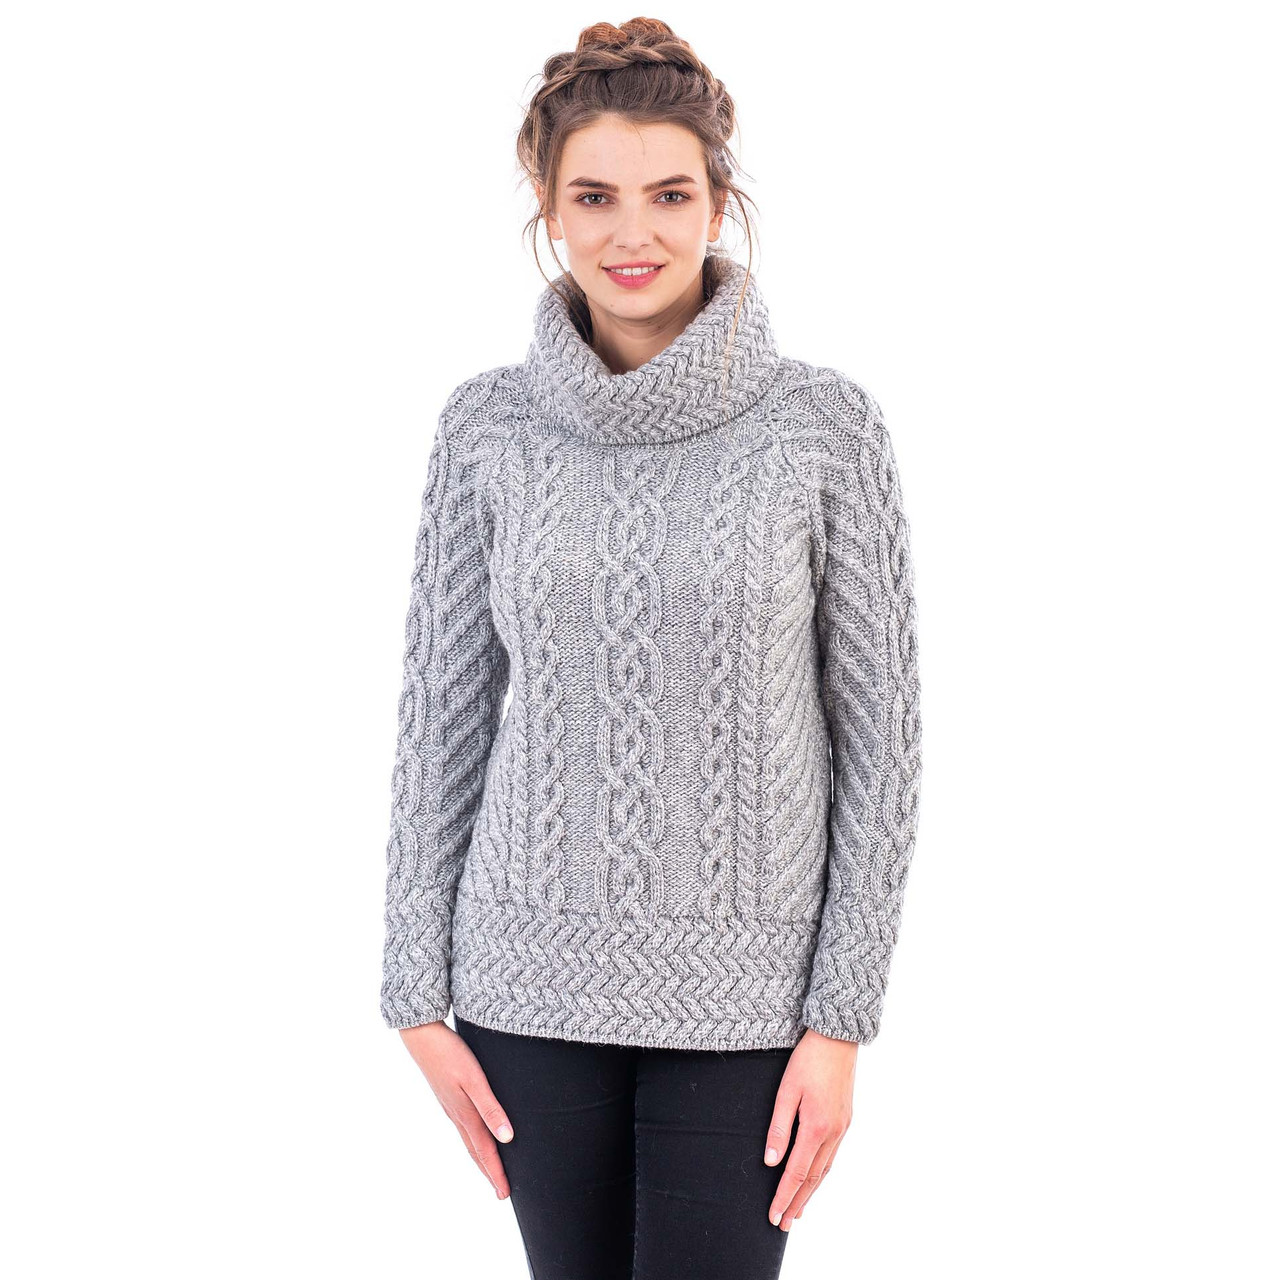 Ladies Cowl Neck Sweater | Dublin Gift Co